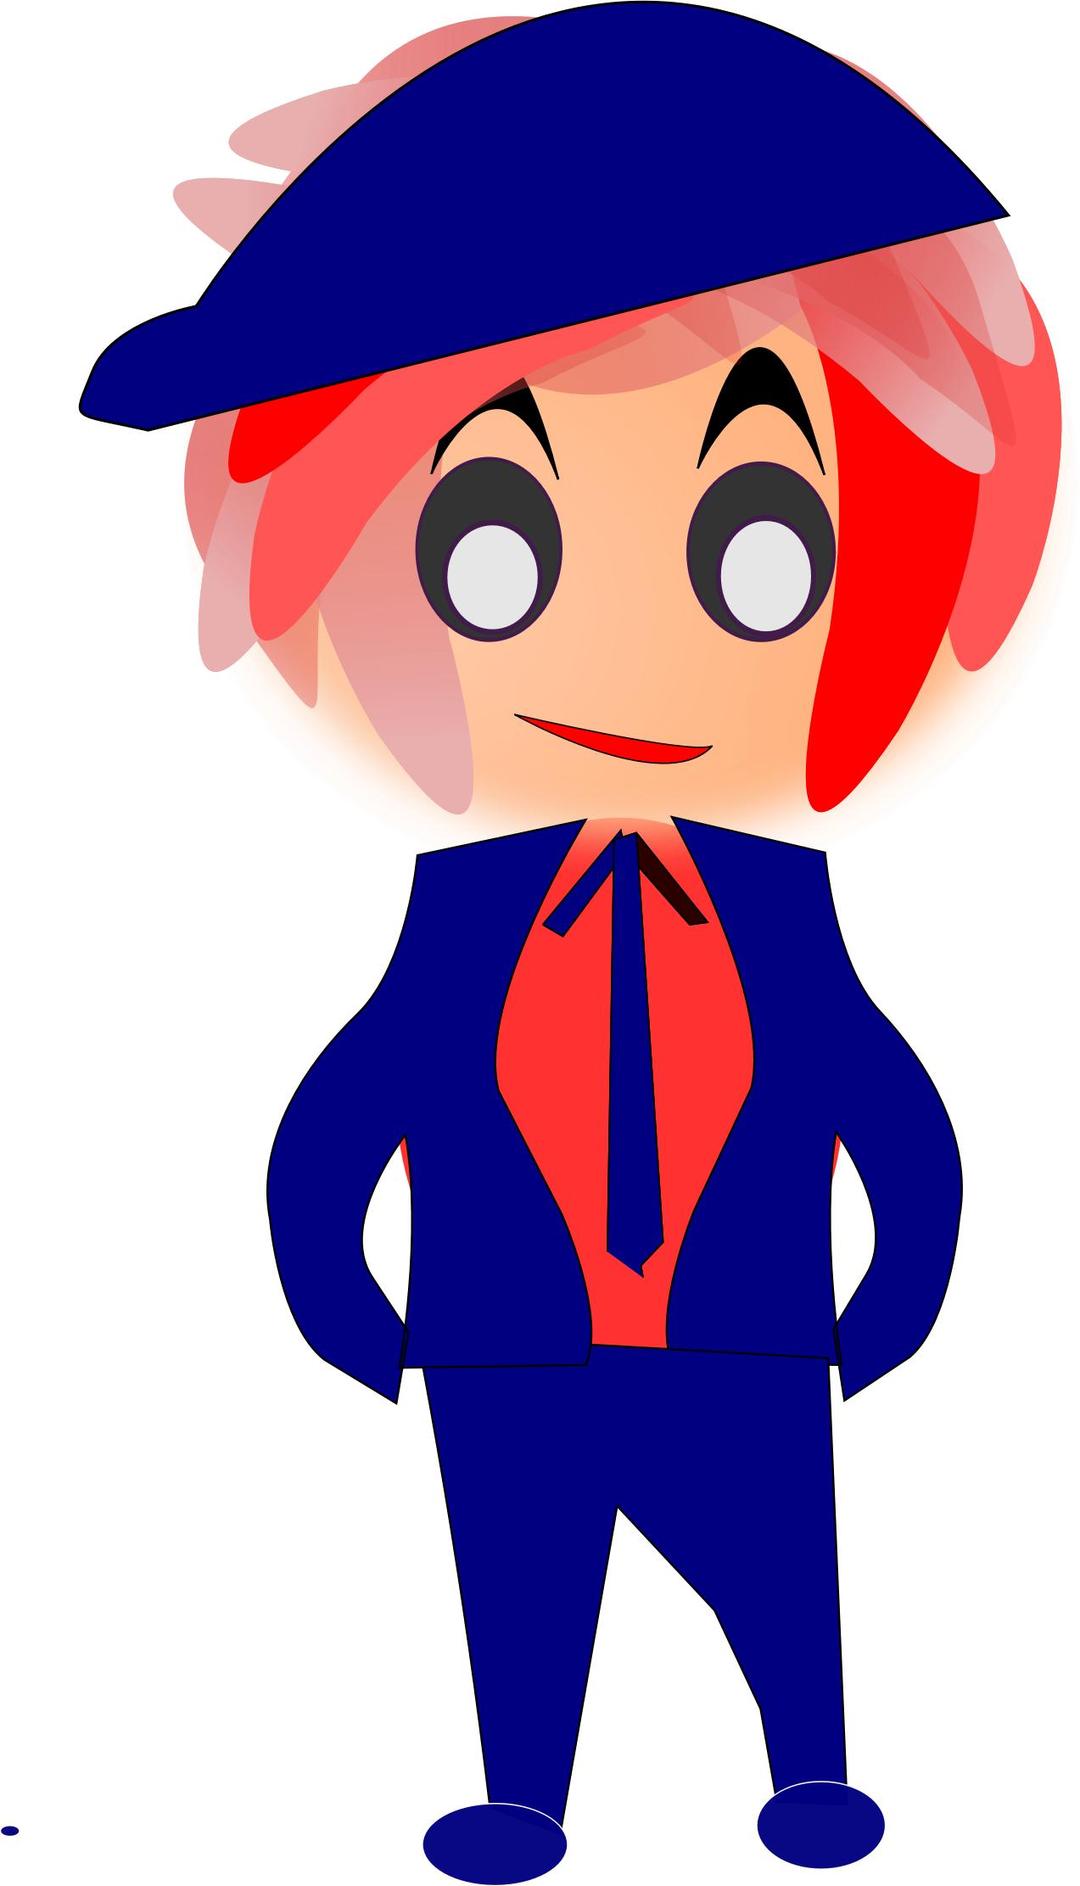 Red Haired Boy 570215 png transparent